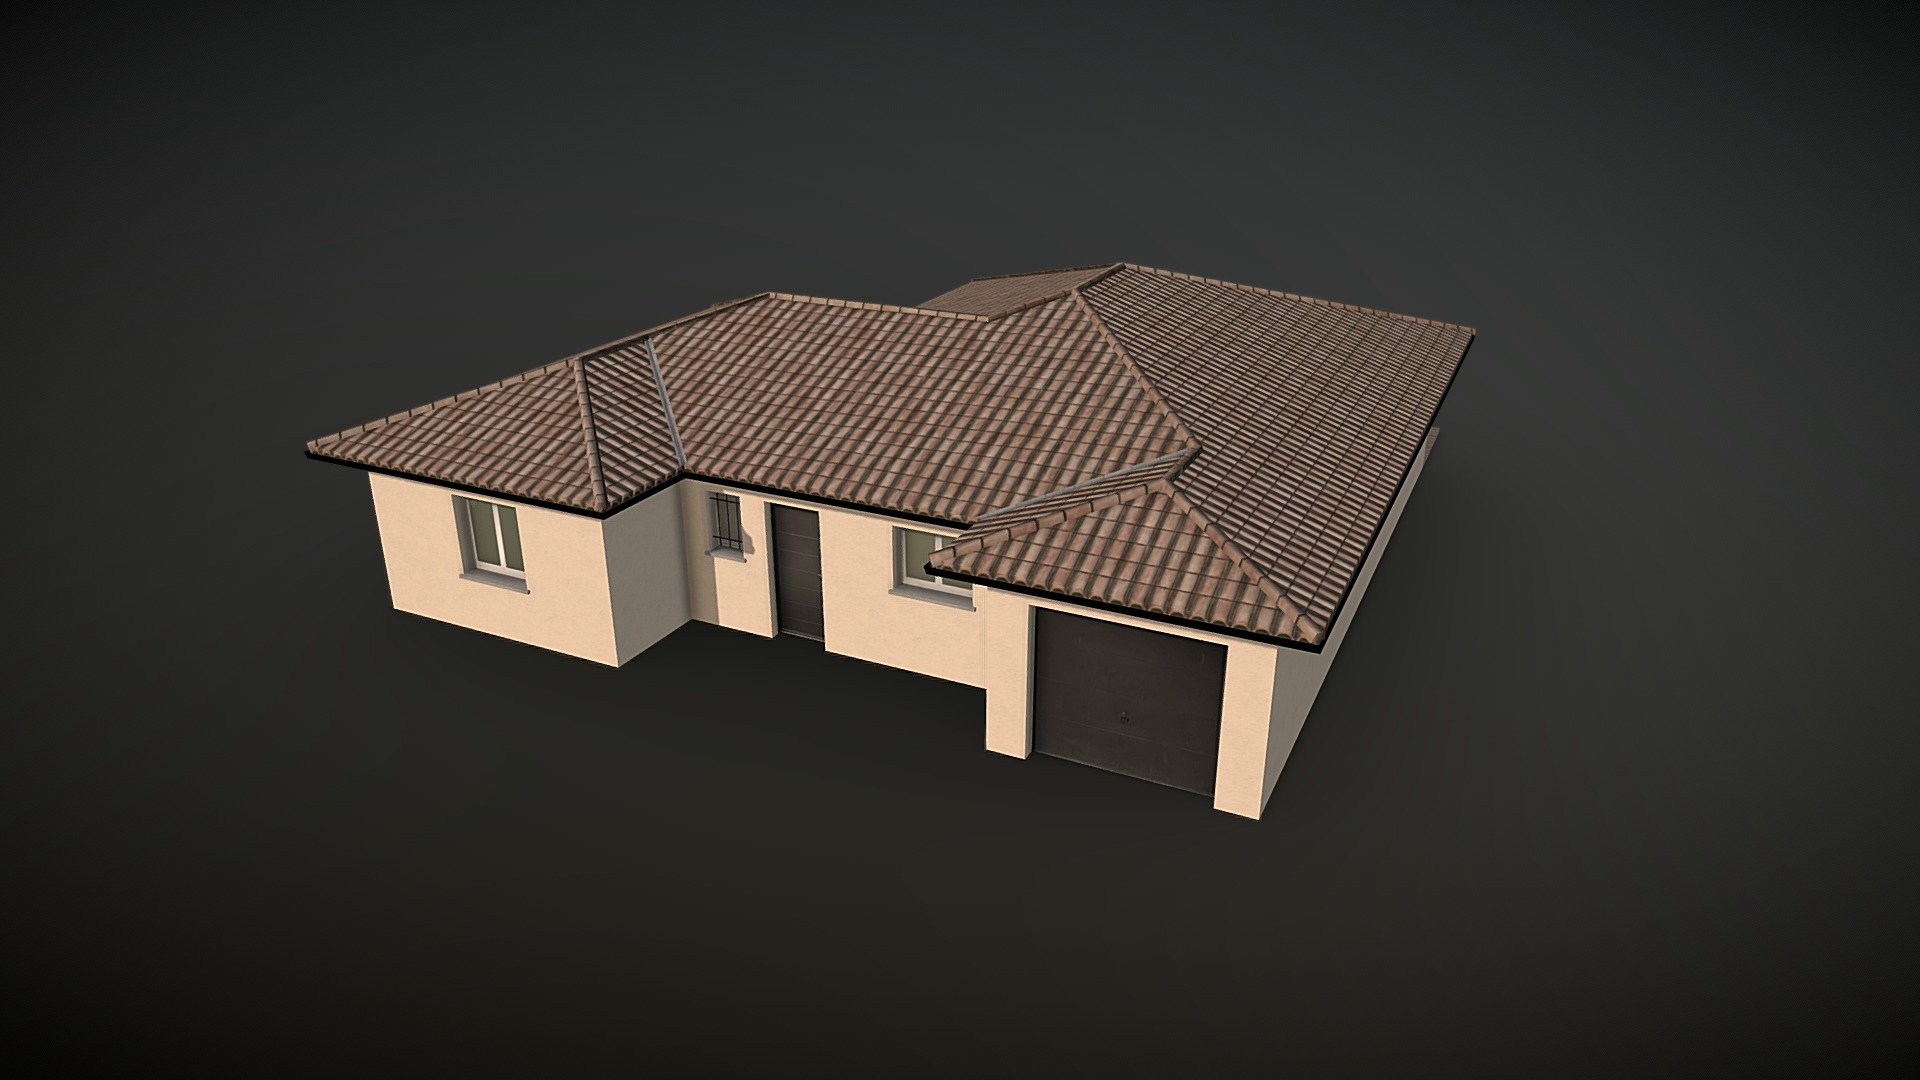 A typical French house with a wooden terrace.

Asset for the game Cities:Skylines 3d model